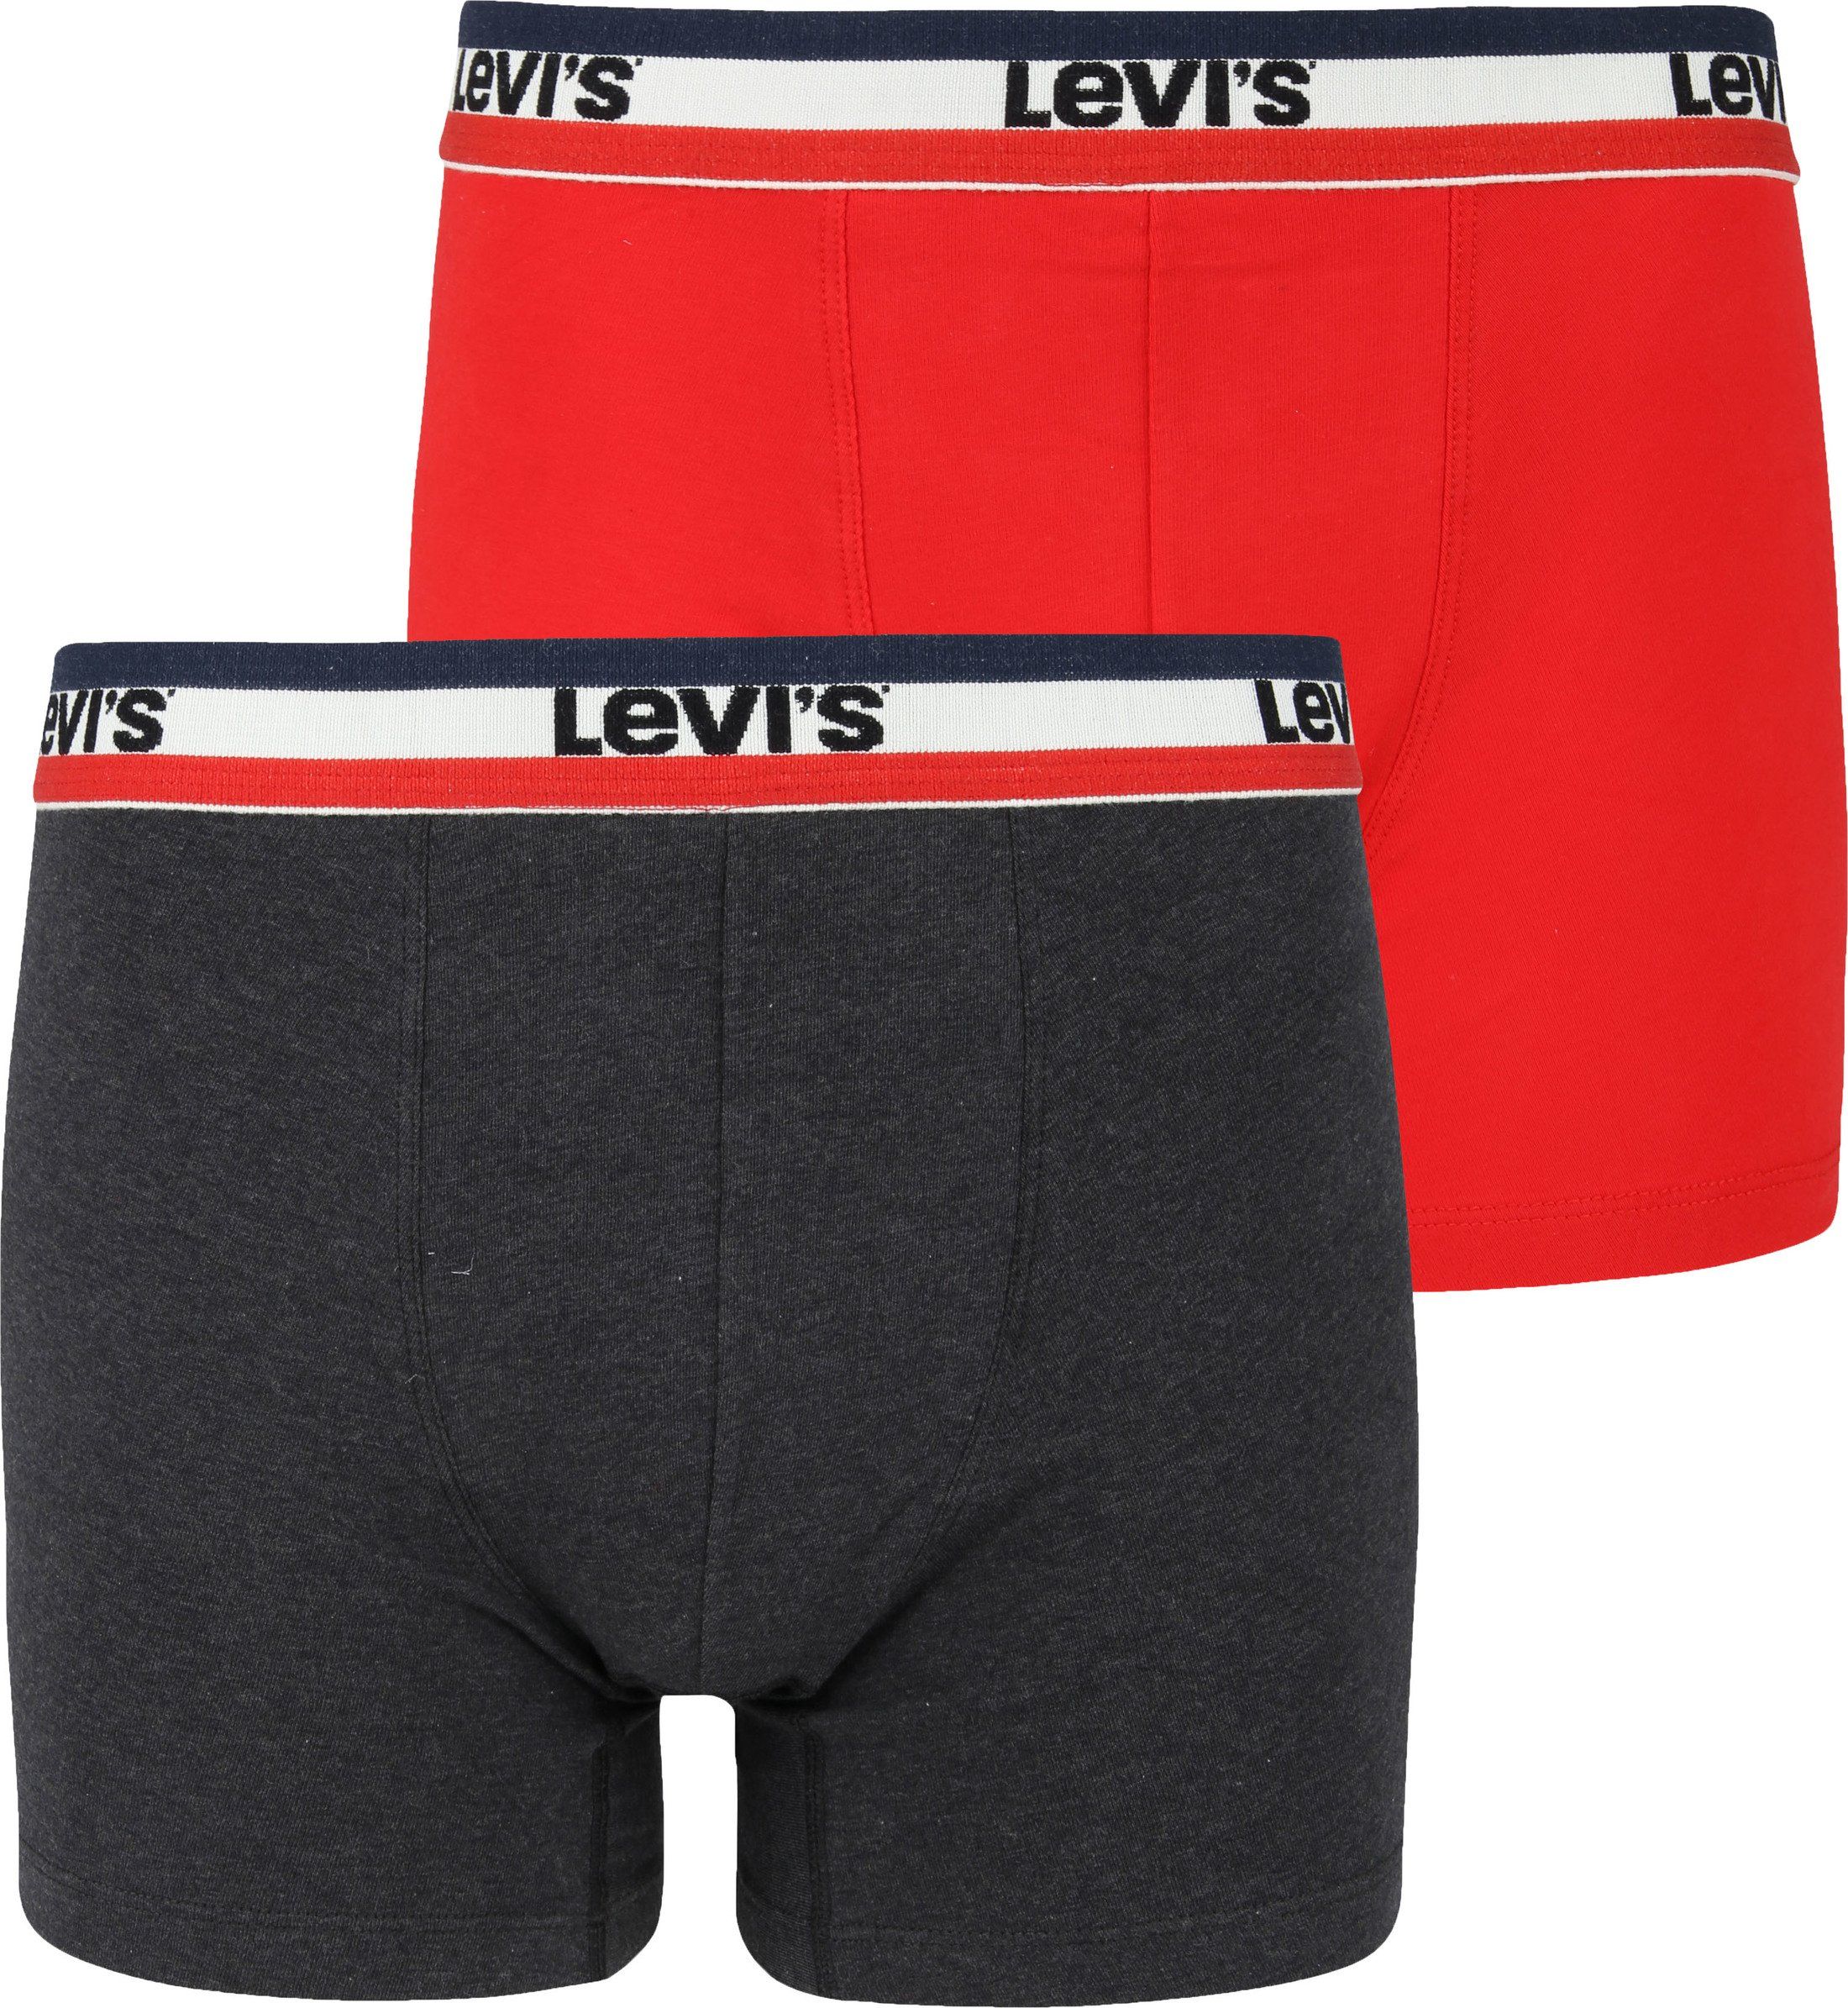 Levi's Boxer Shorts 2-Pack Dark Grey Red Grey size L